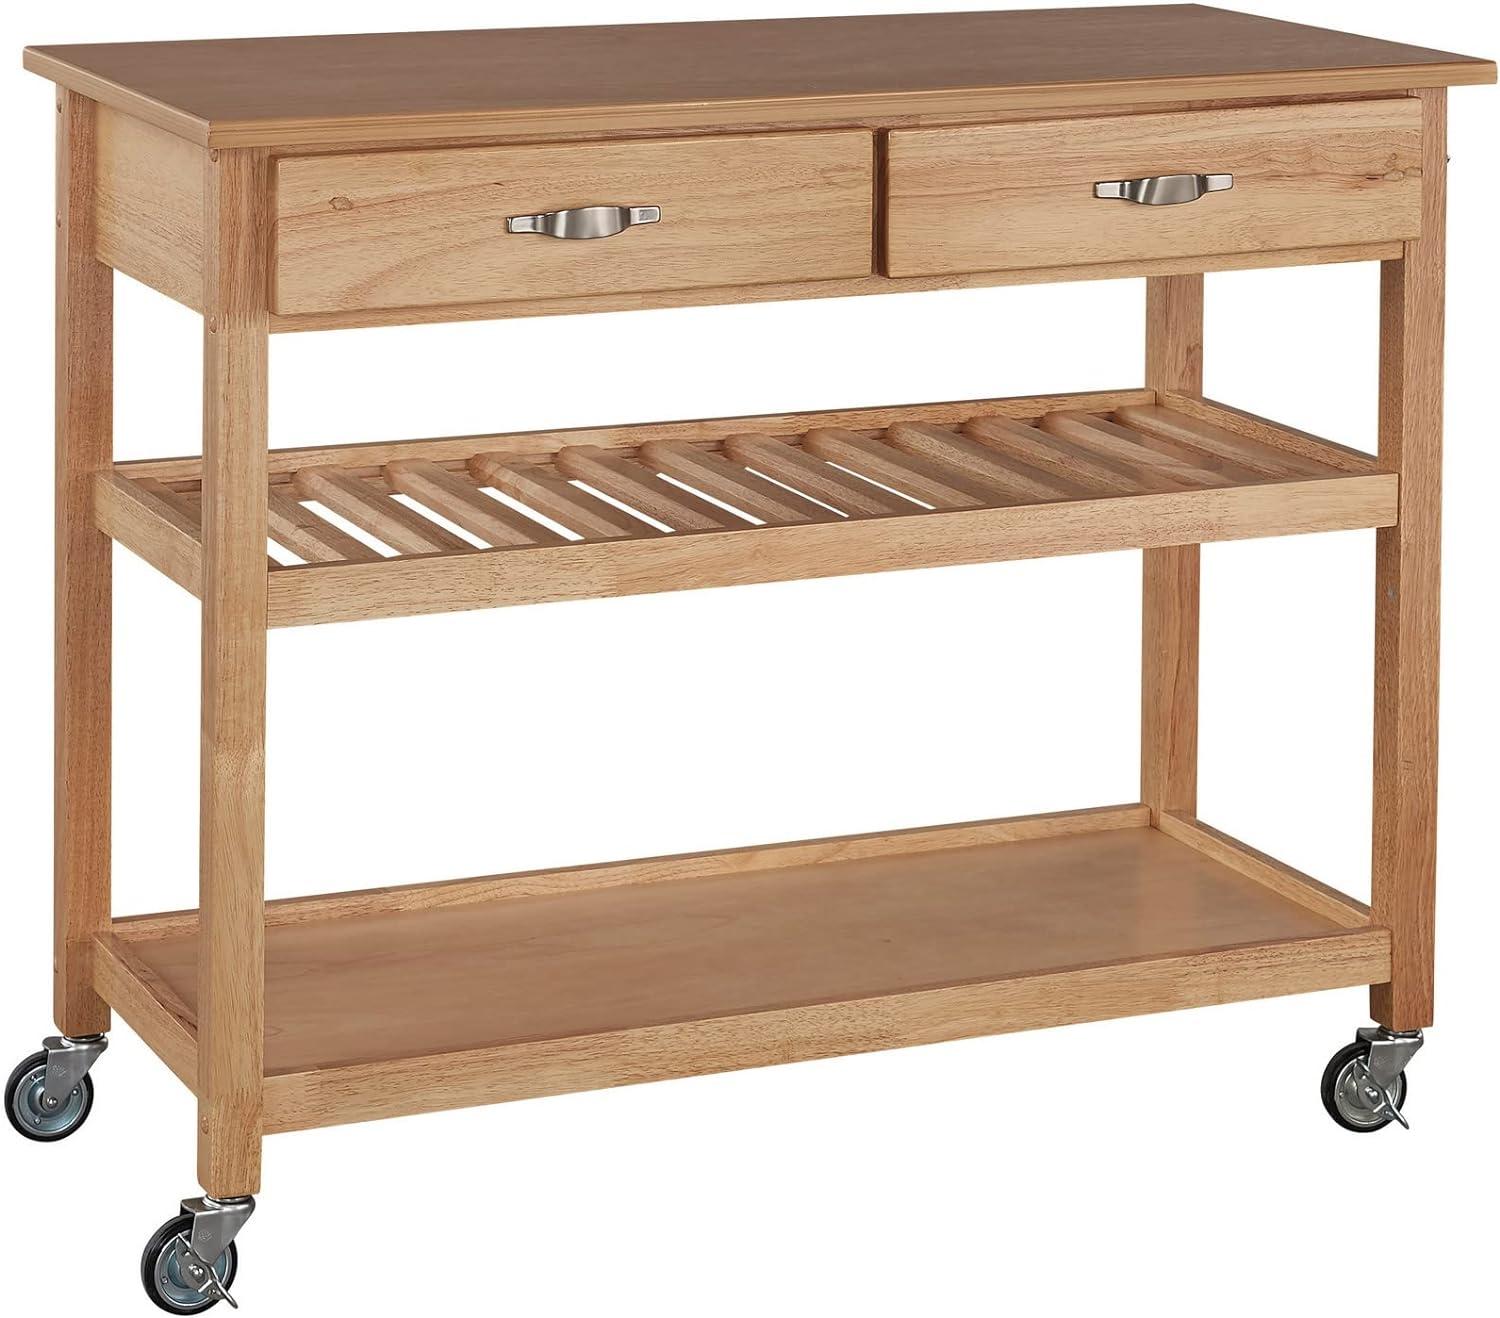 Solid Wood Rectangular Kitchen Cart with Wine Rack and Storage